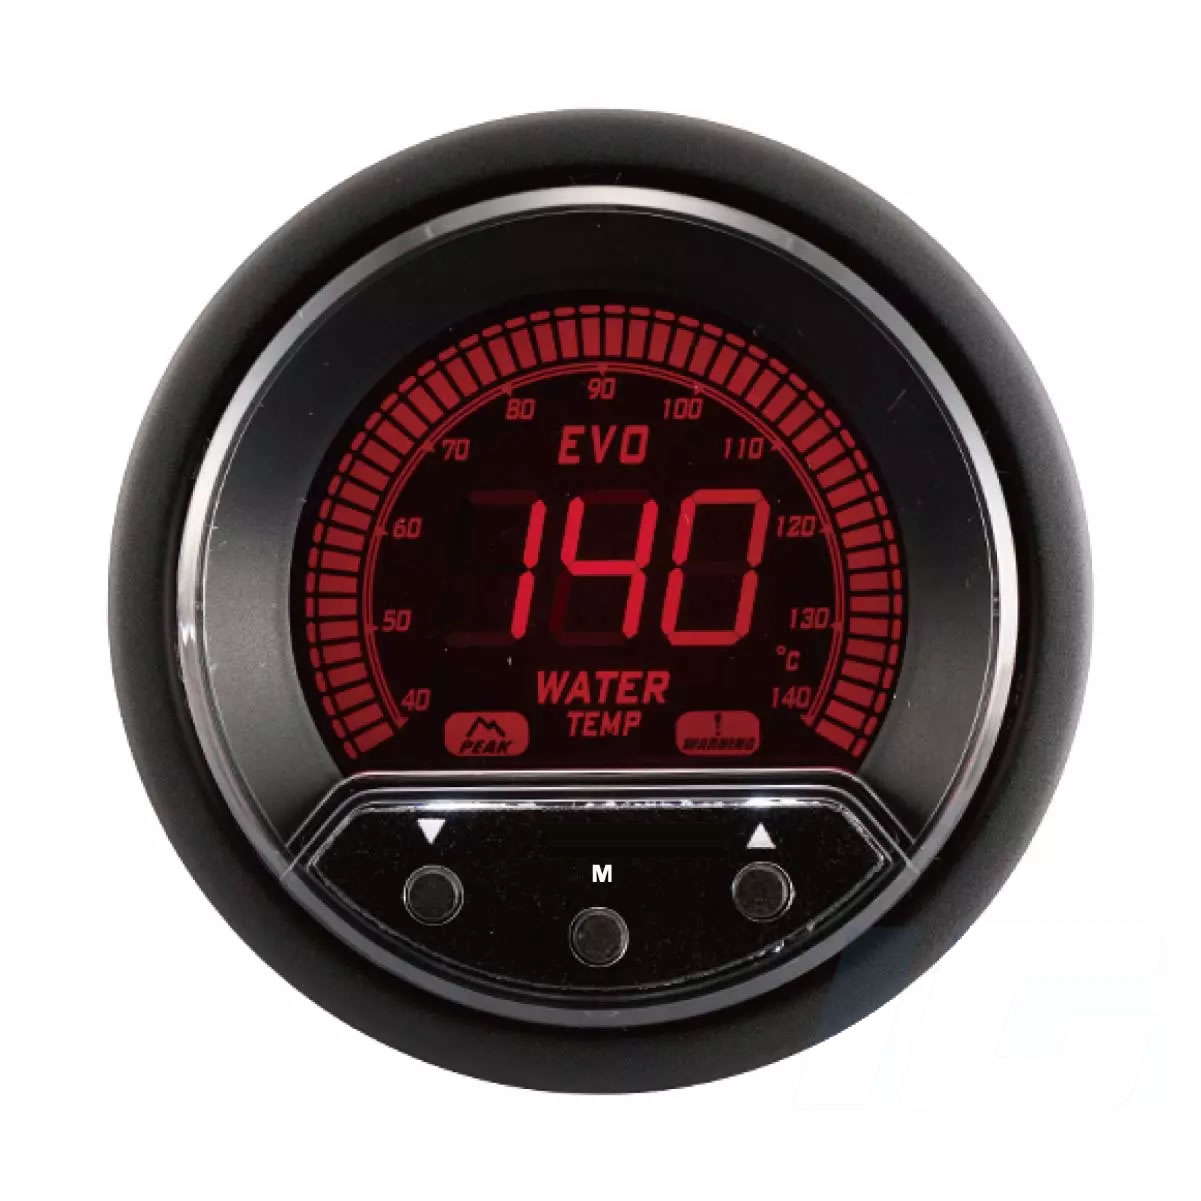 52mm LCD Performance Car Gauges - Water Temp Gauge With Sensor and Warning and Peak For Your Sport Racing Car